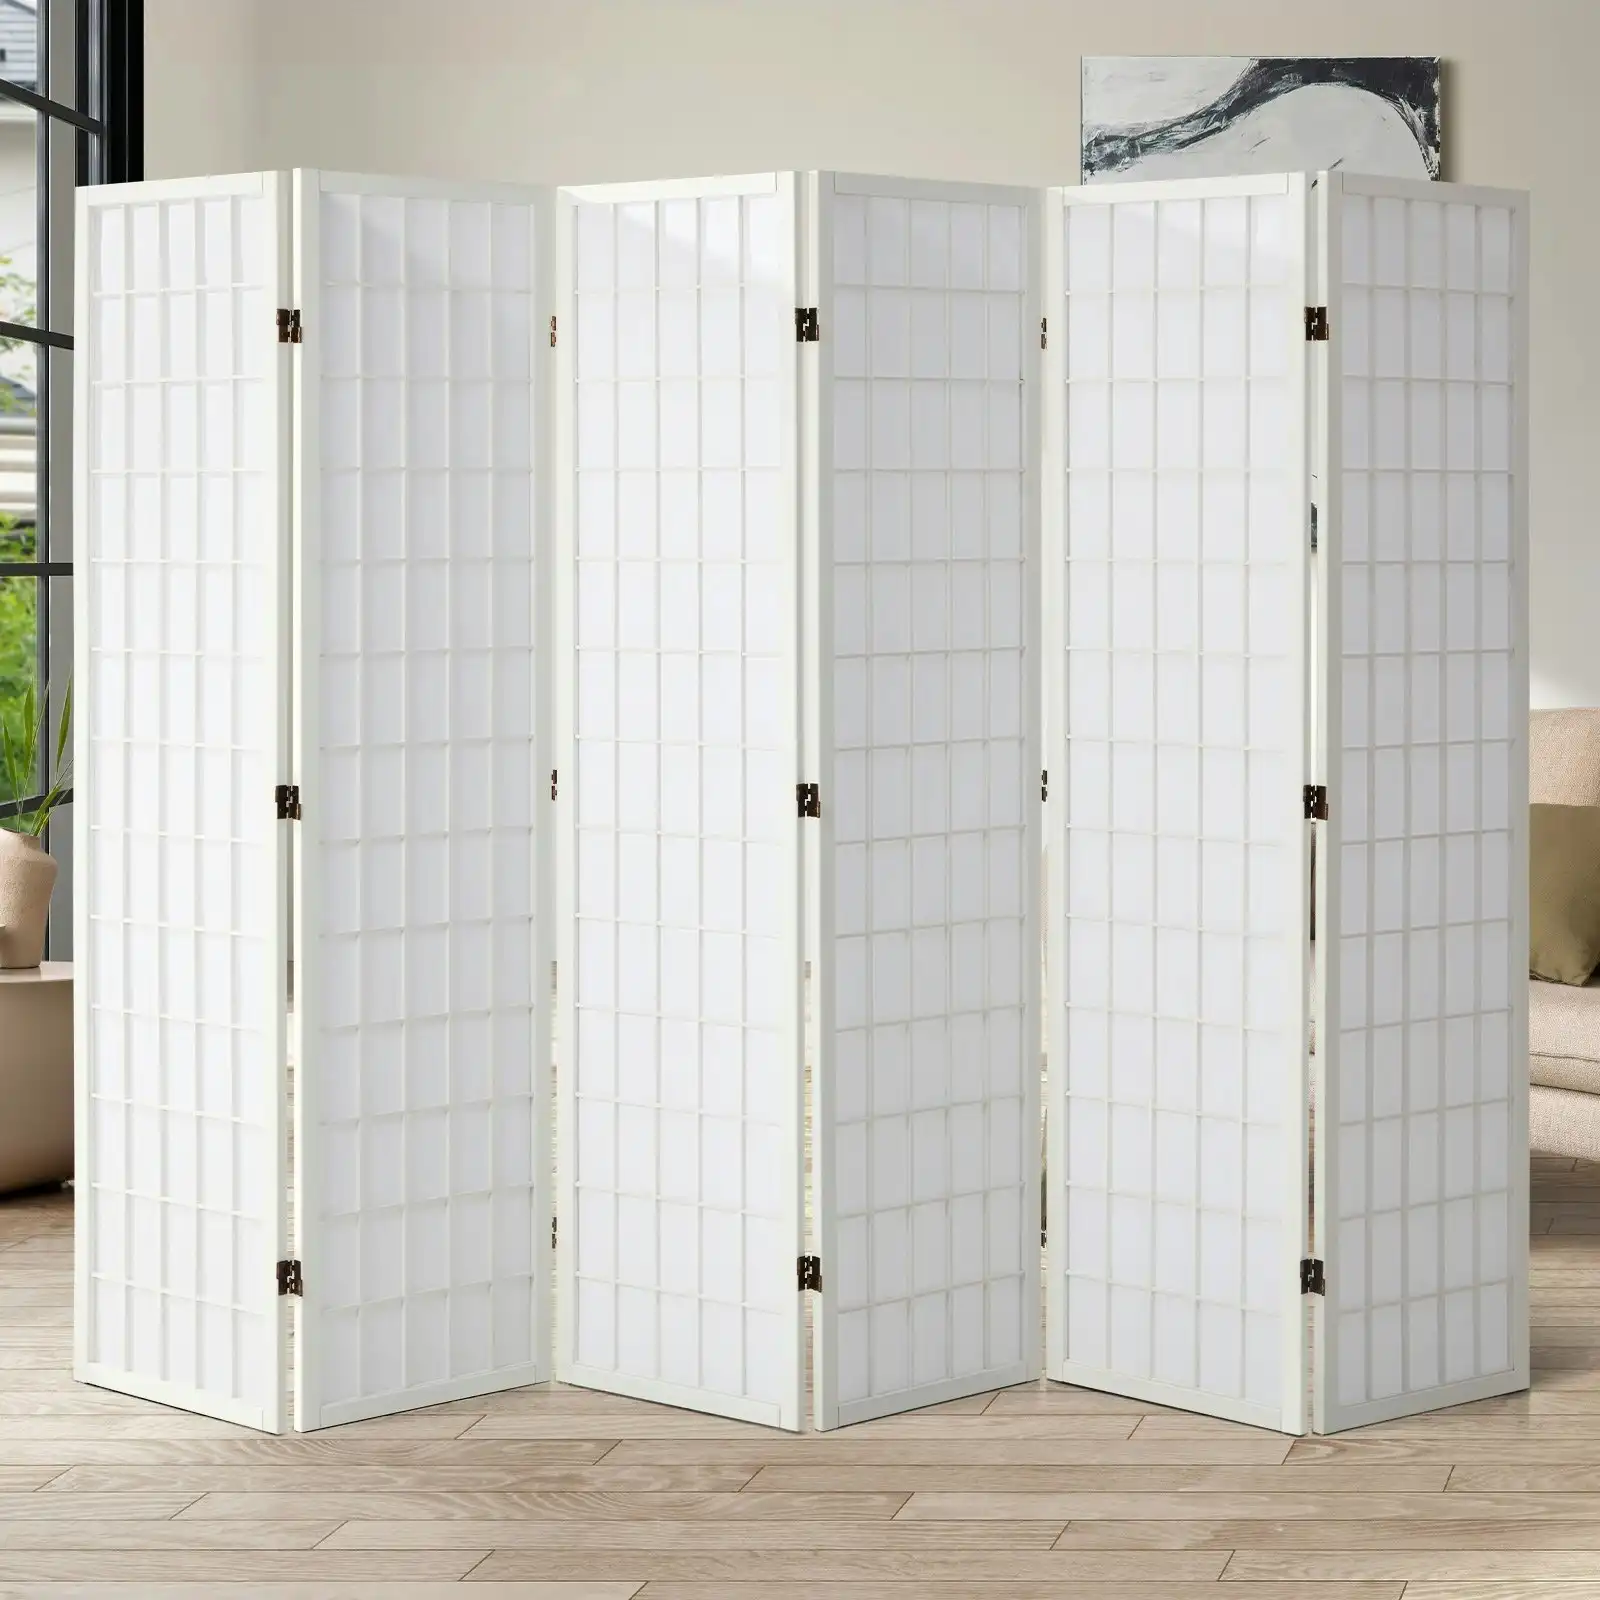 Oikiture 6 Panel Room Divider Privacy Screen Partition Timber Farbic White